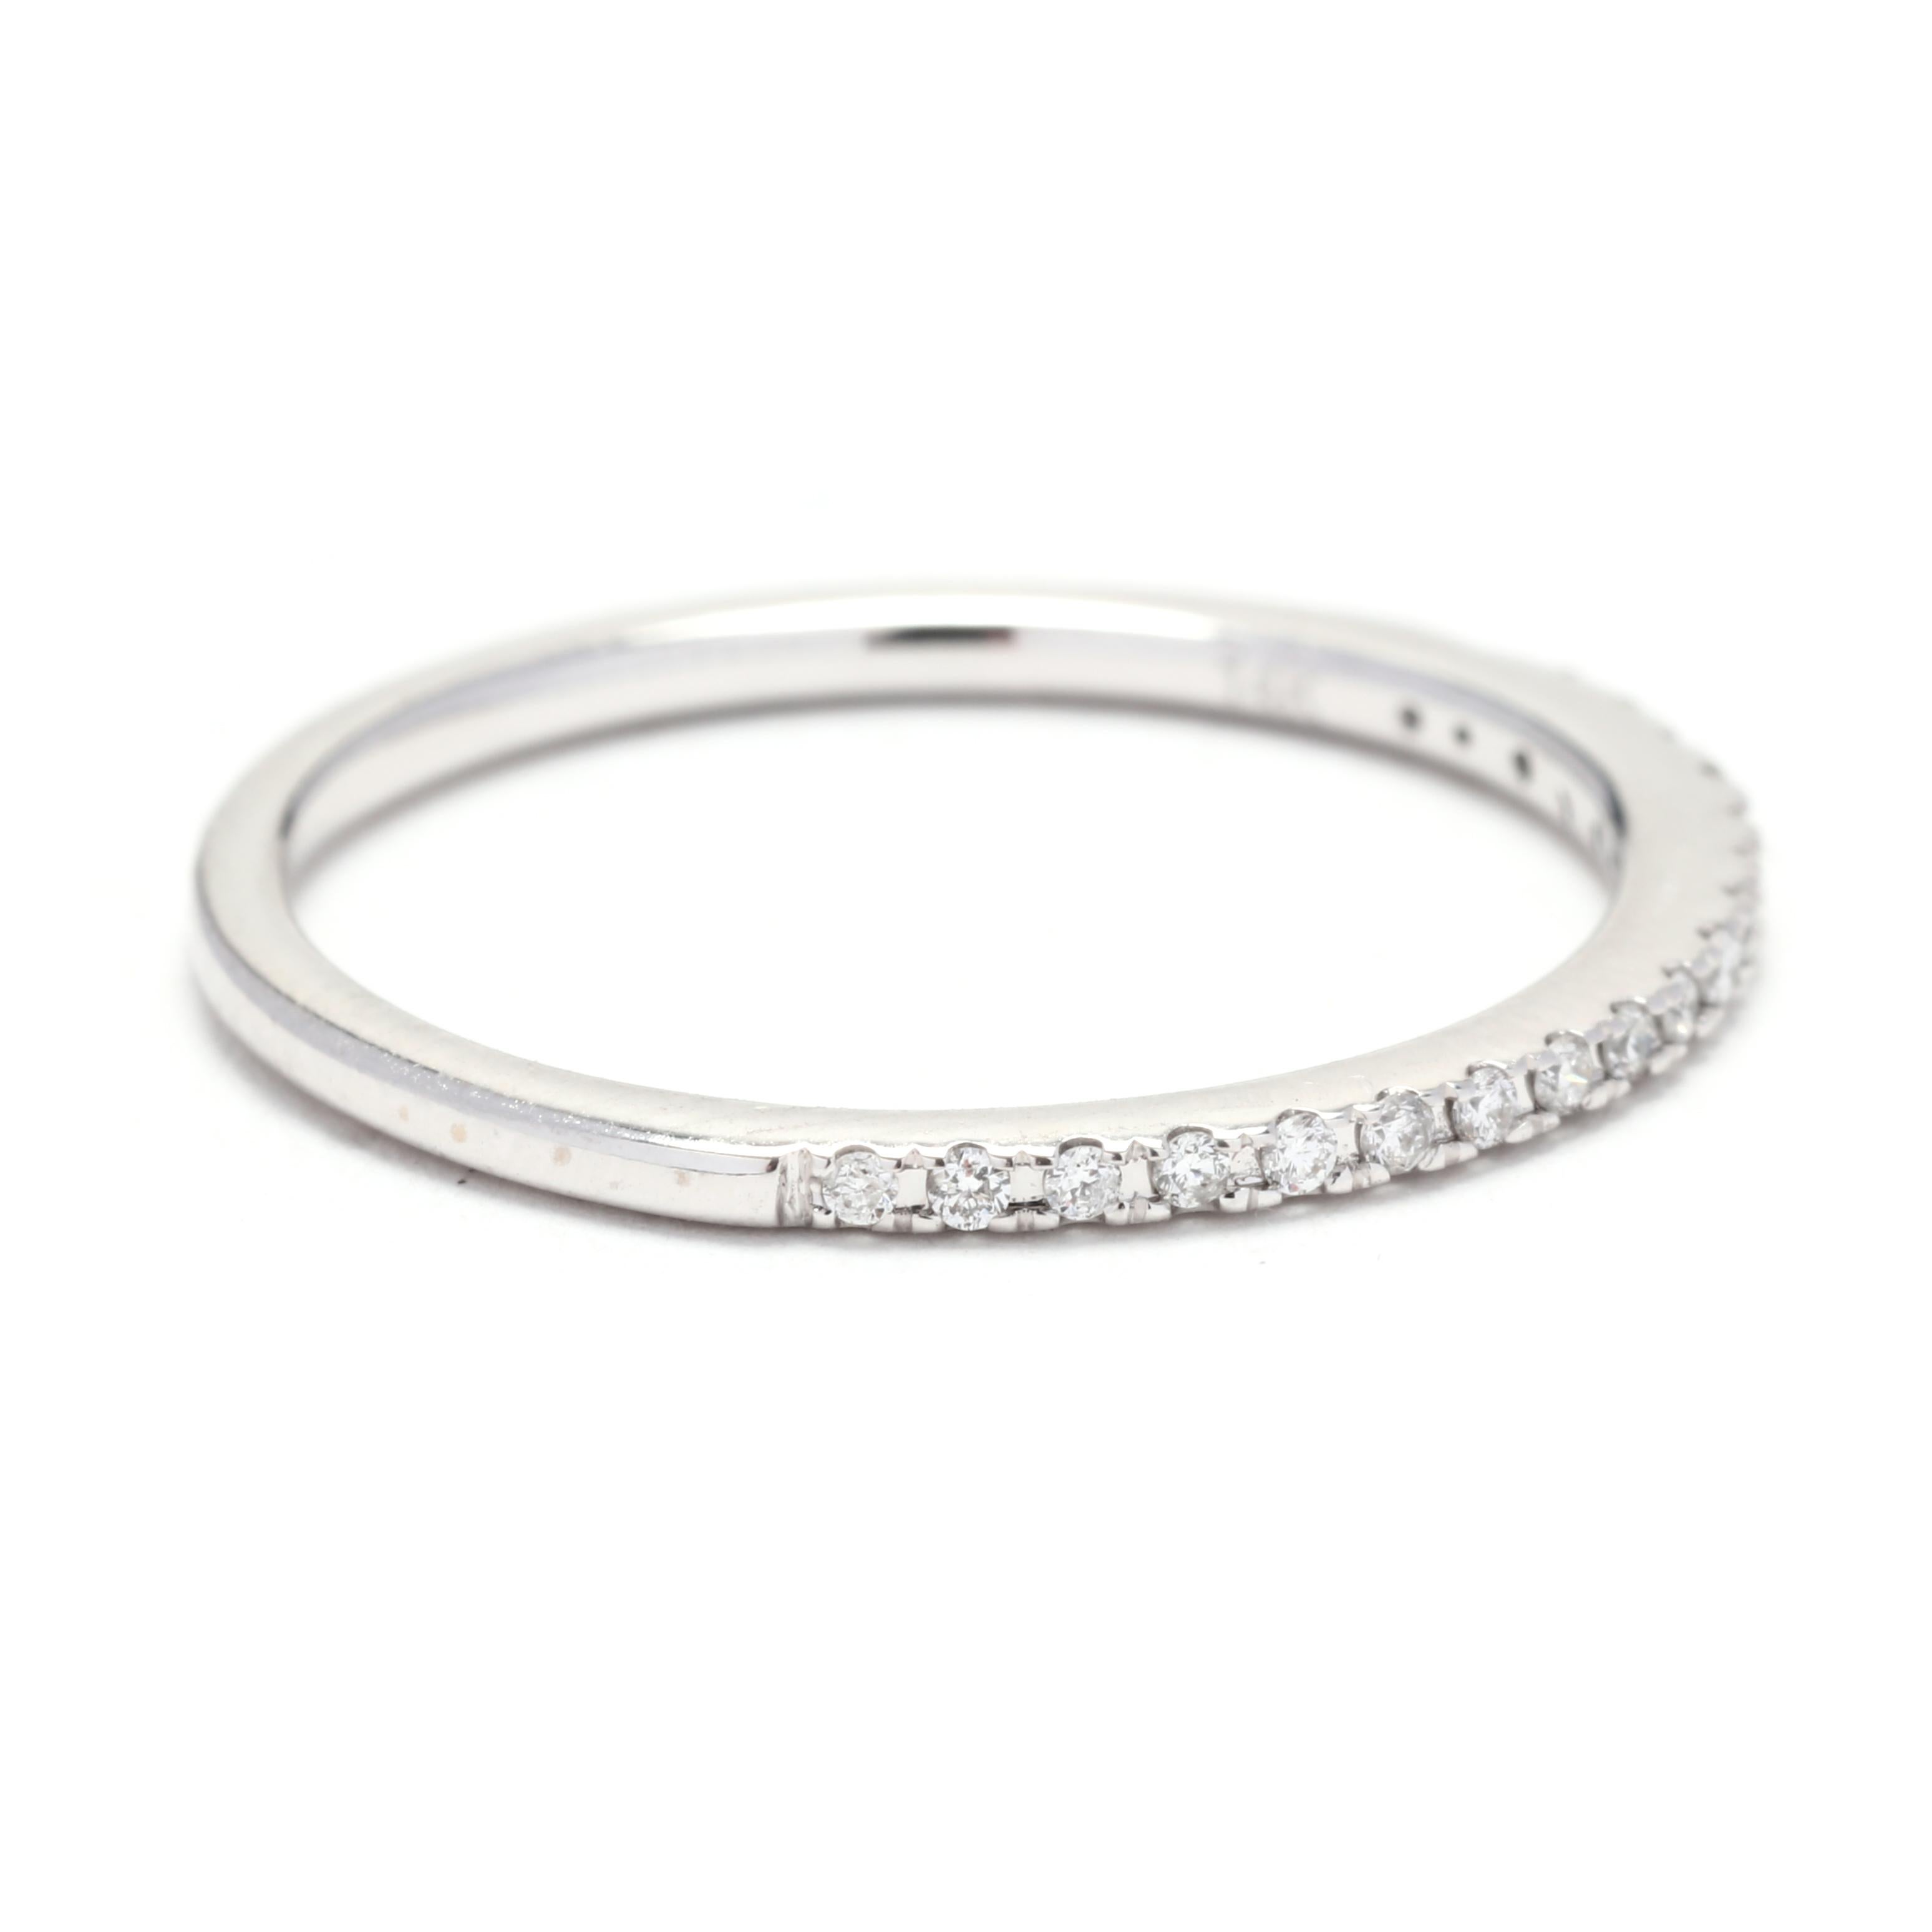 This beautiful thin diamond wedding band is crafted in platinum and features a total carat weight of 0.25ctw. The ring size is 4.75, making it a perfect fit for a petite finger. The delicate design of this band makes it ideal for stacking with other